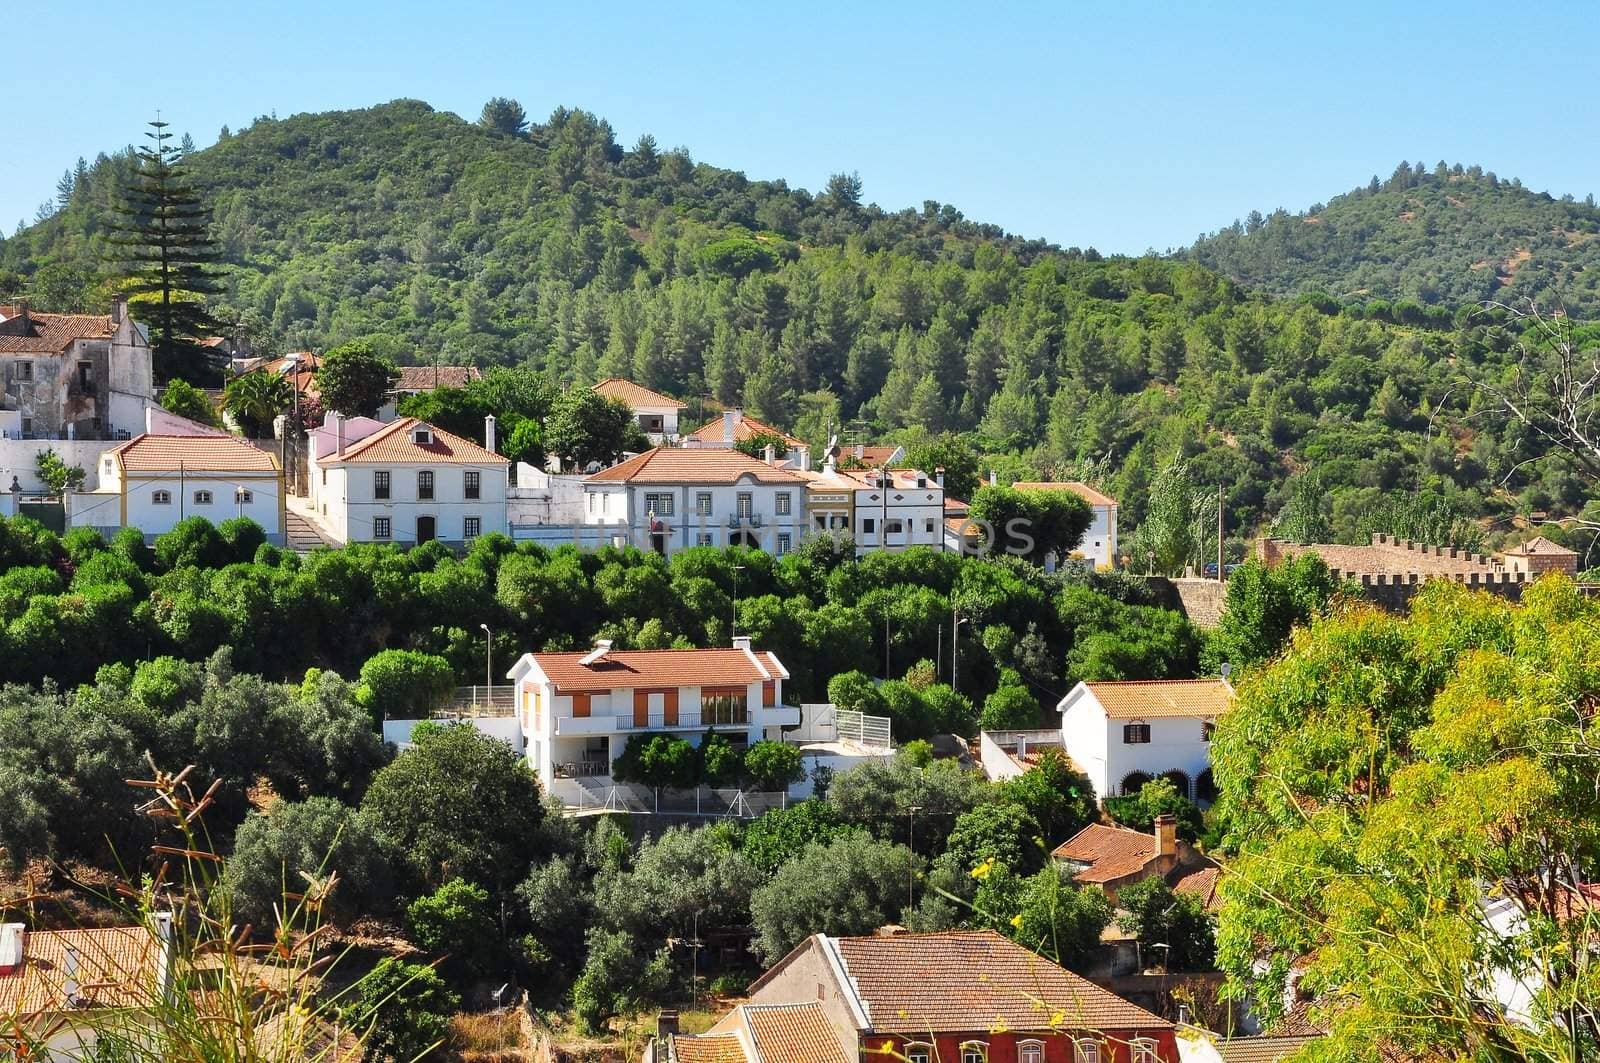 Old town,village on the hillside in Portugal